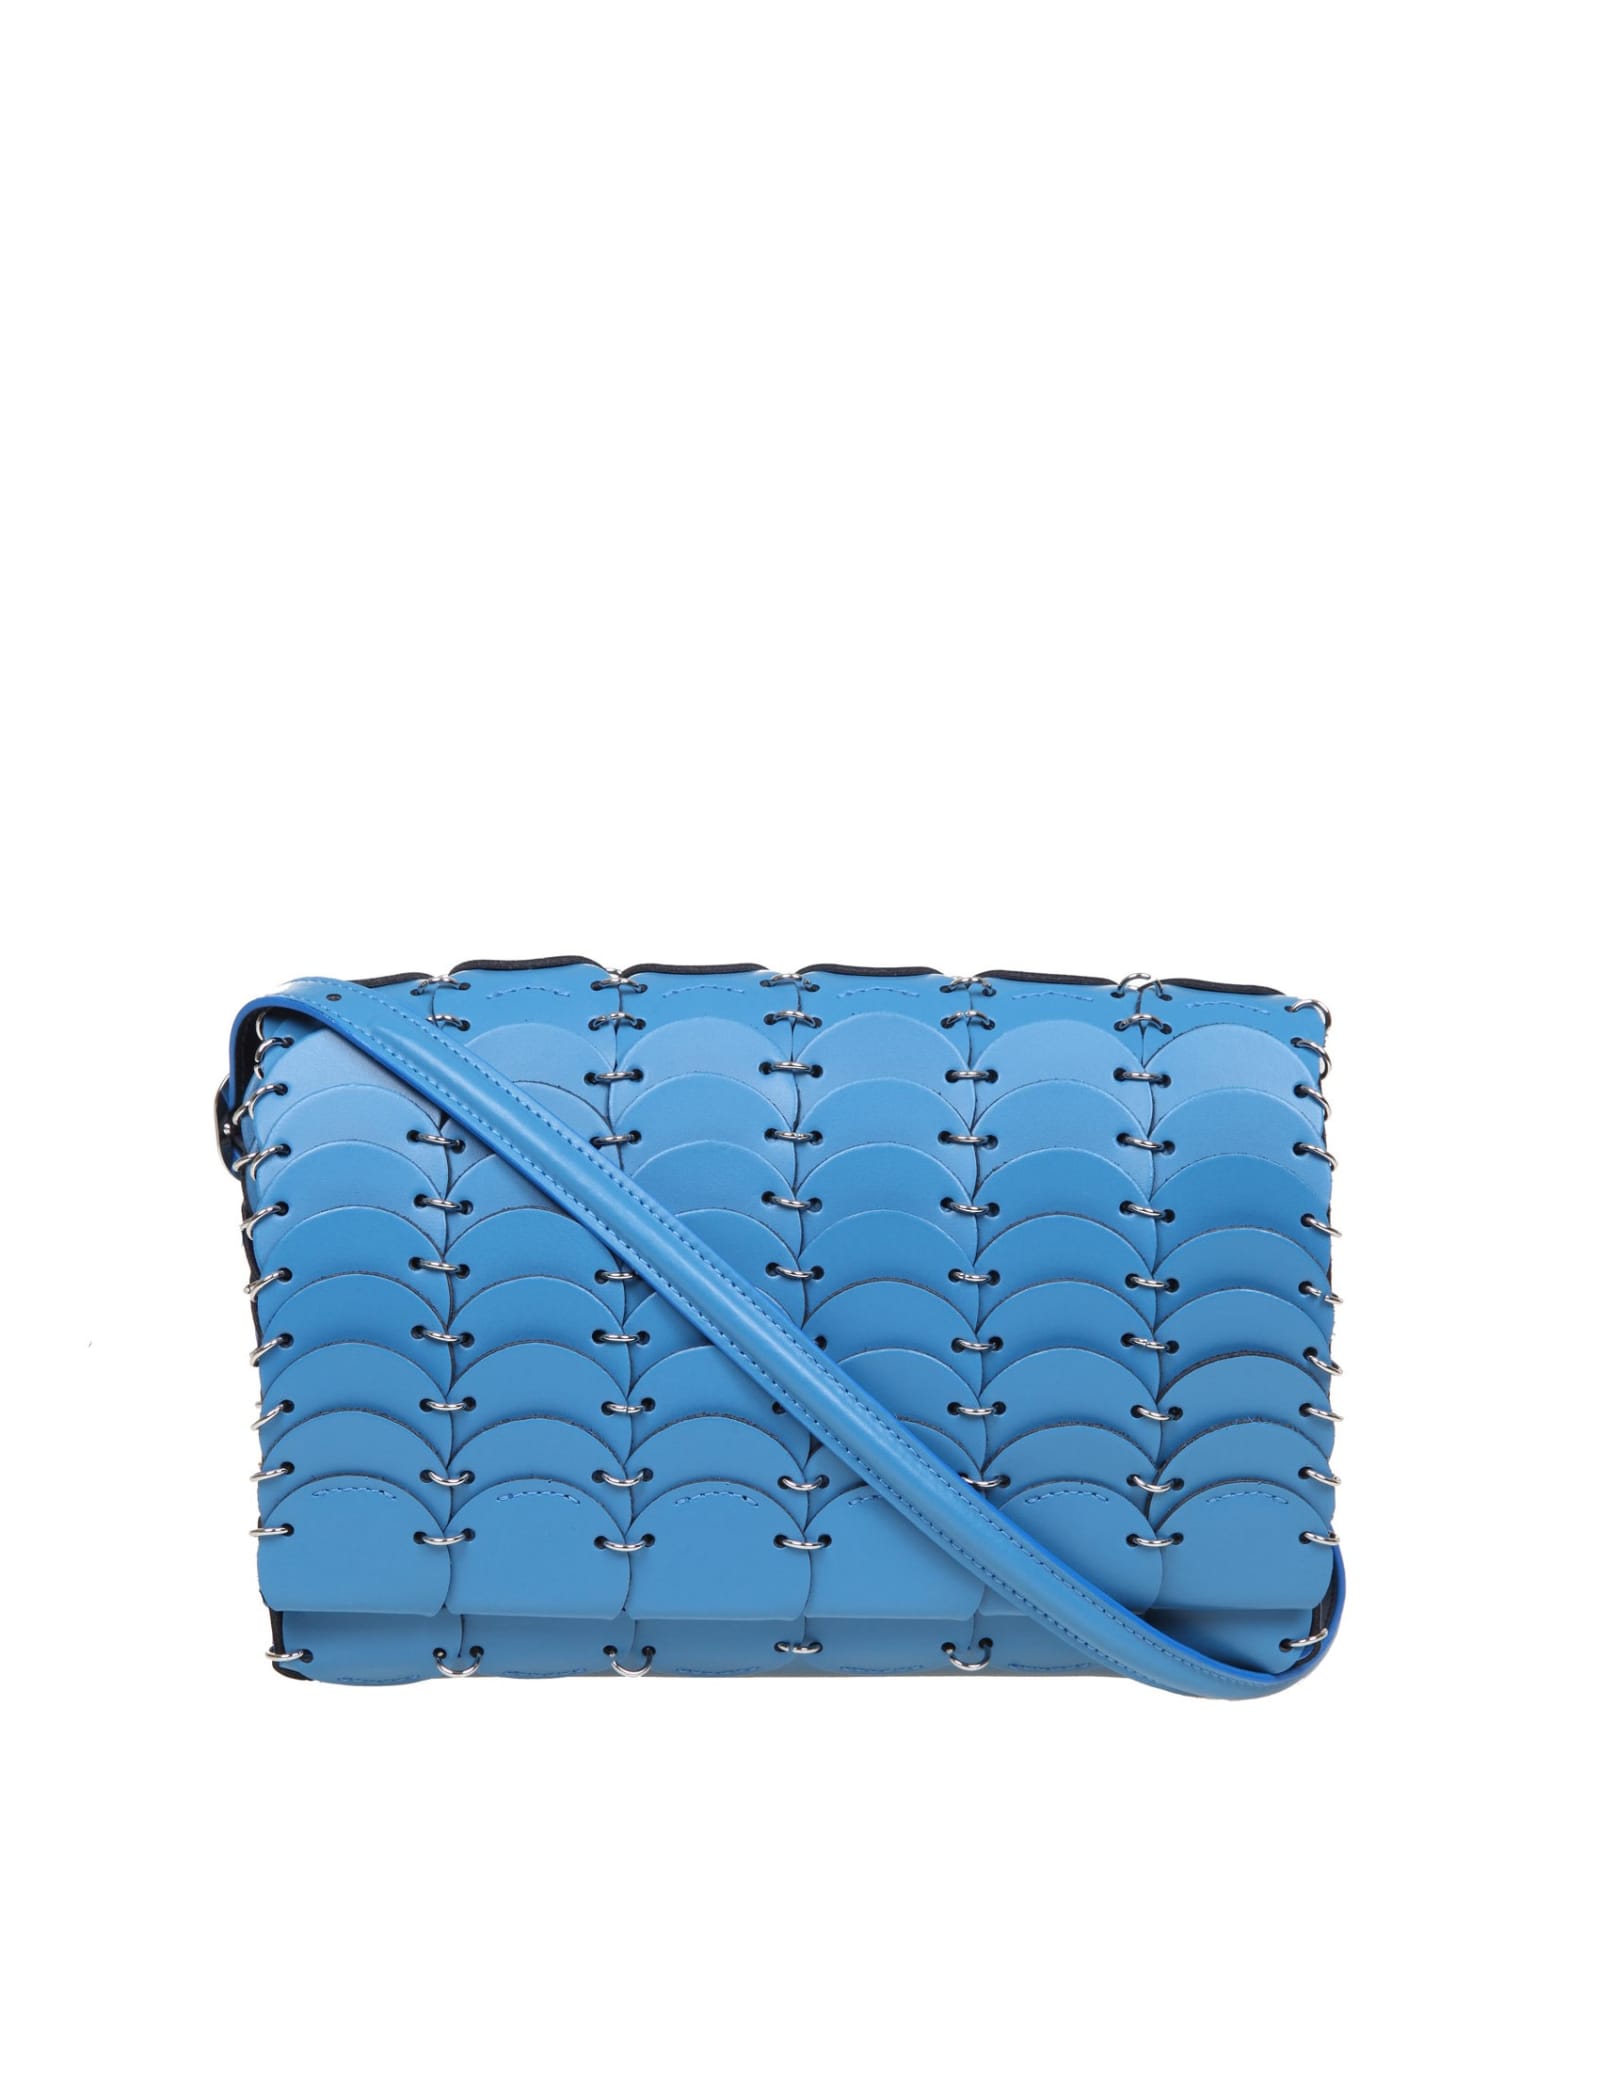 Paco Rabanne Pacoio Bag In Blue Leather